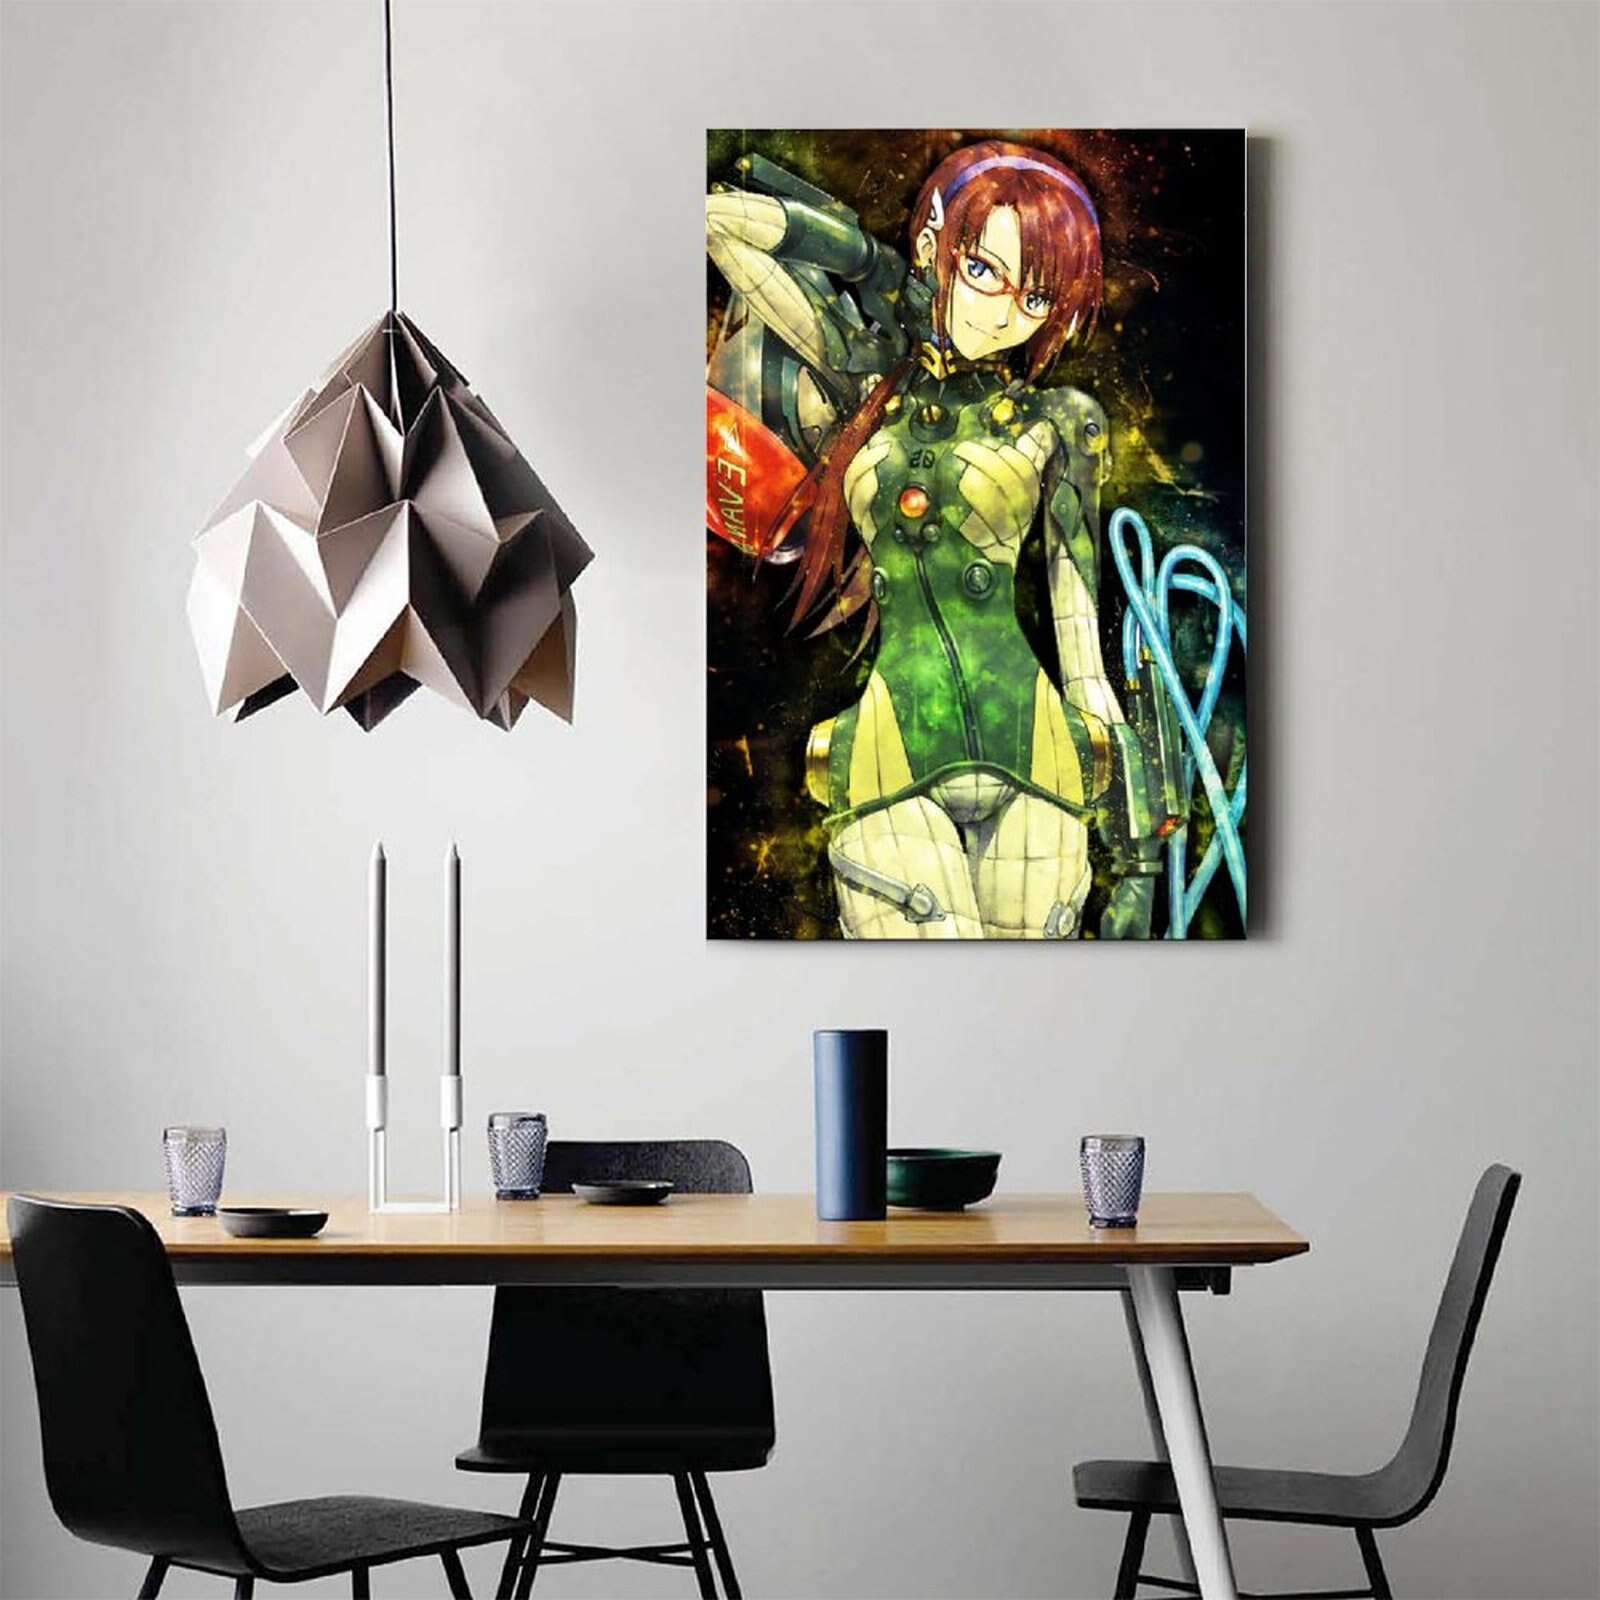 Anime Evangelion Girl MakinamiCanvas Painting Wall Art Posters and Prints Wall Pictures for Living Room Decoration 2 - Evangelion Shop